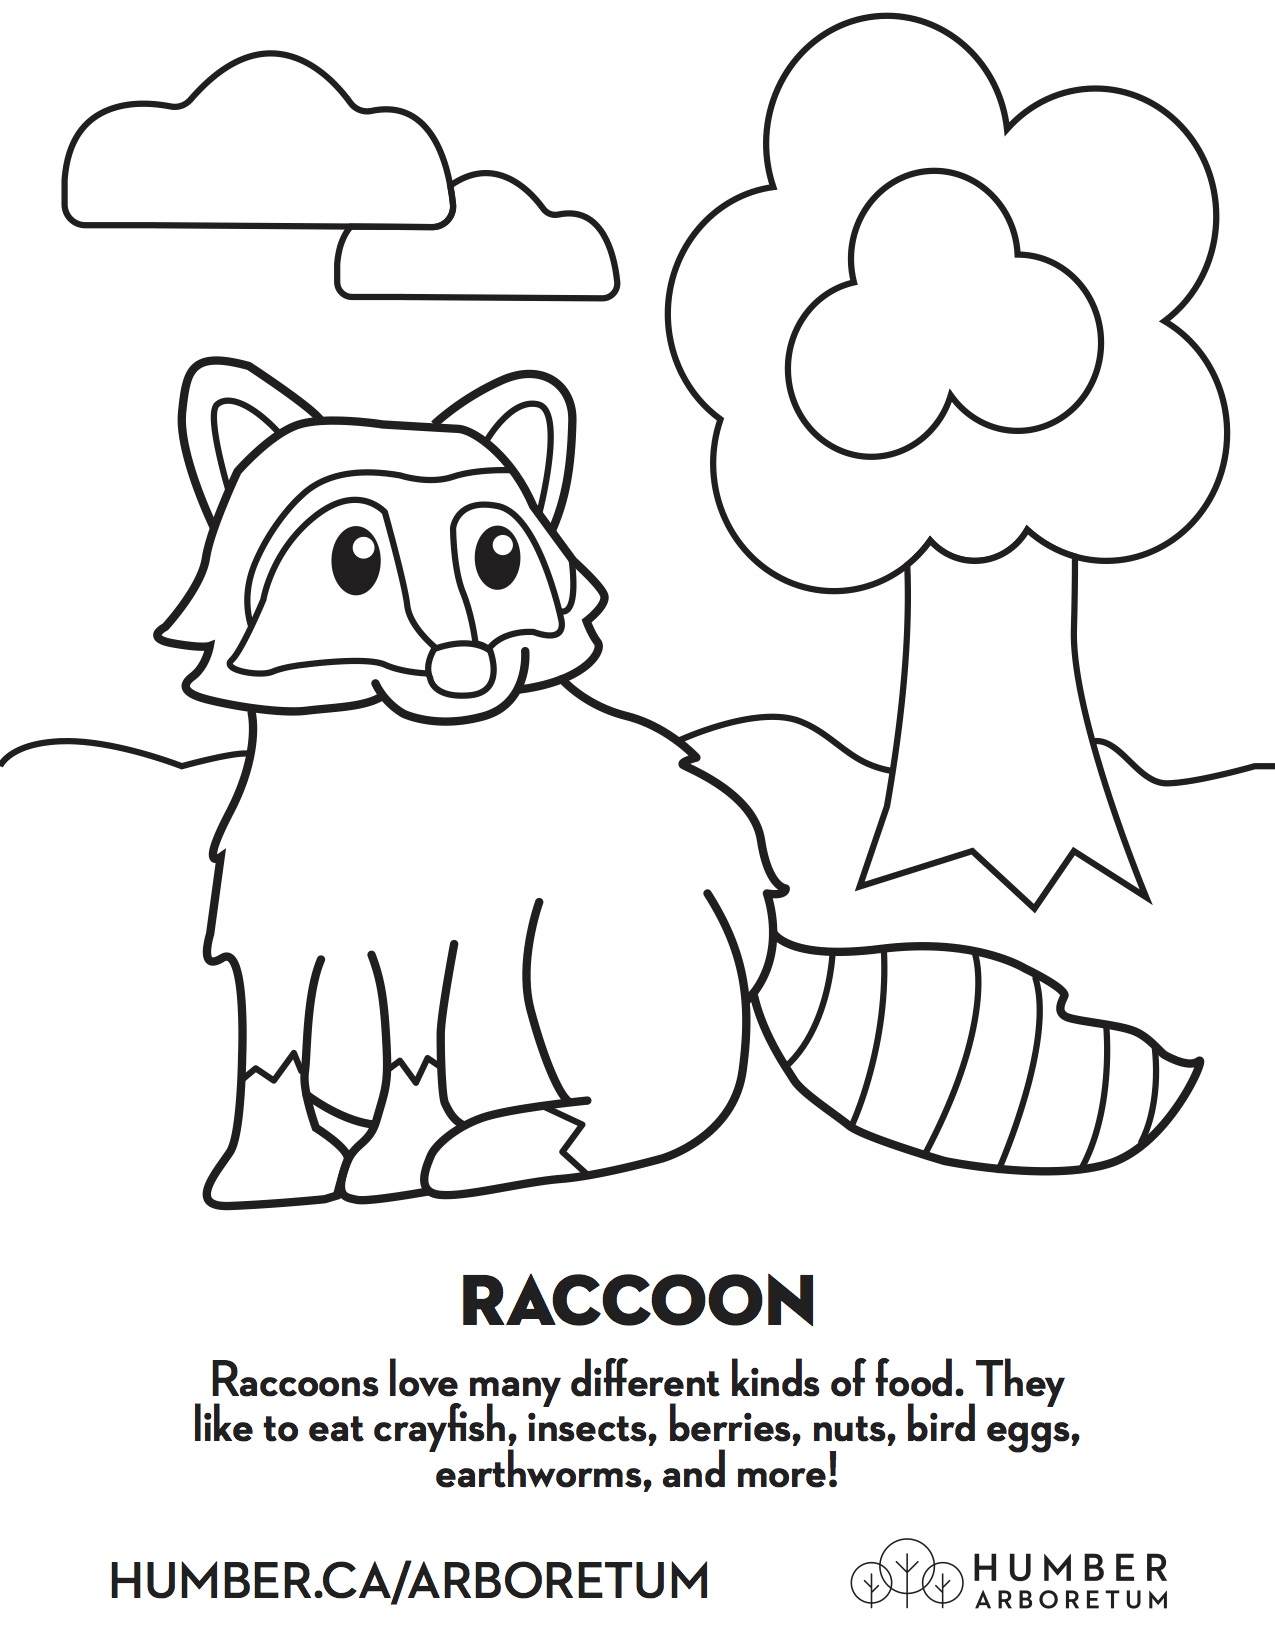 A black and white line drawing of a raccoon for children to colour